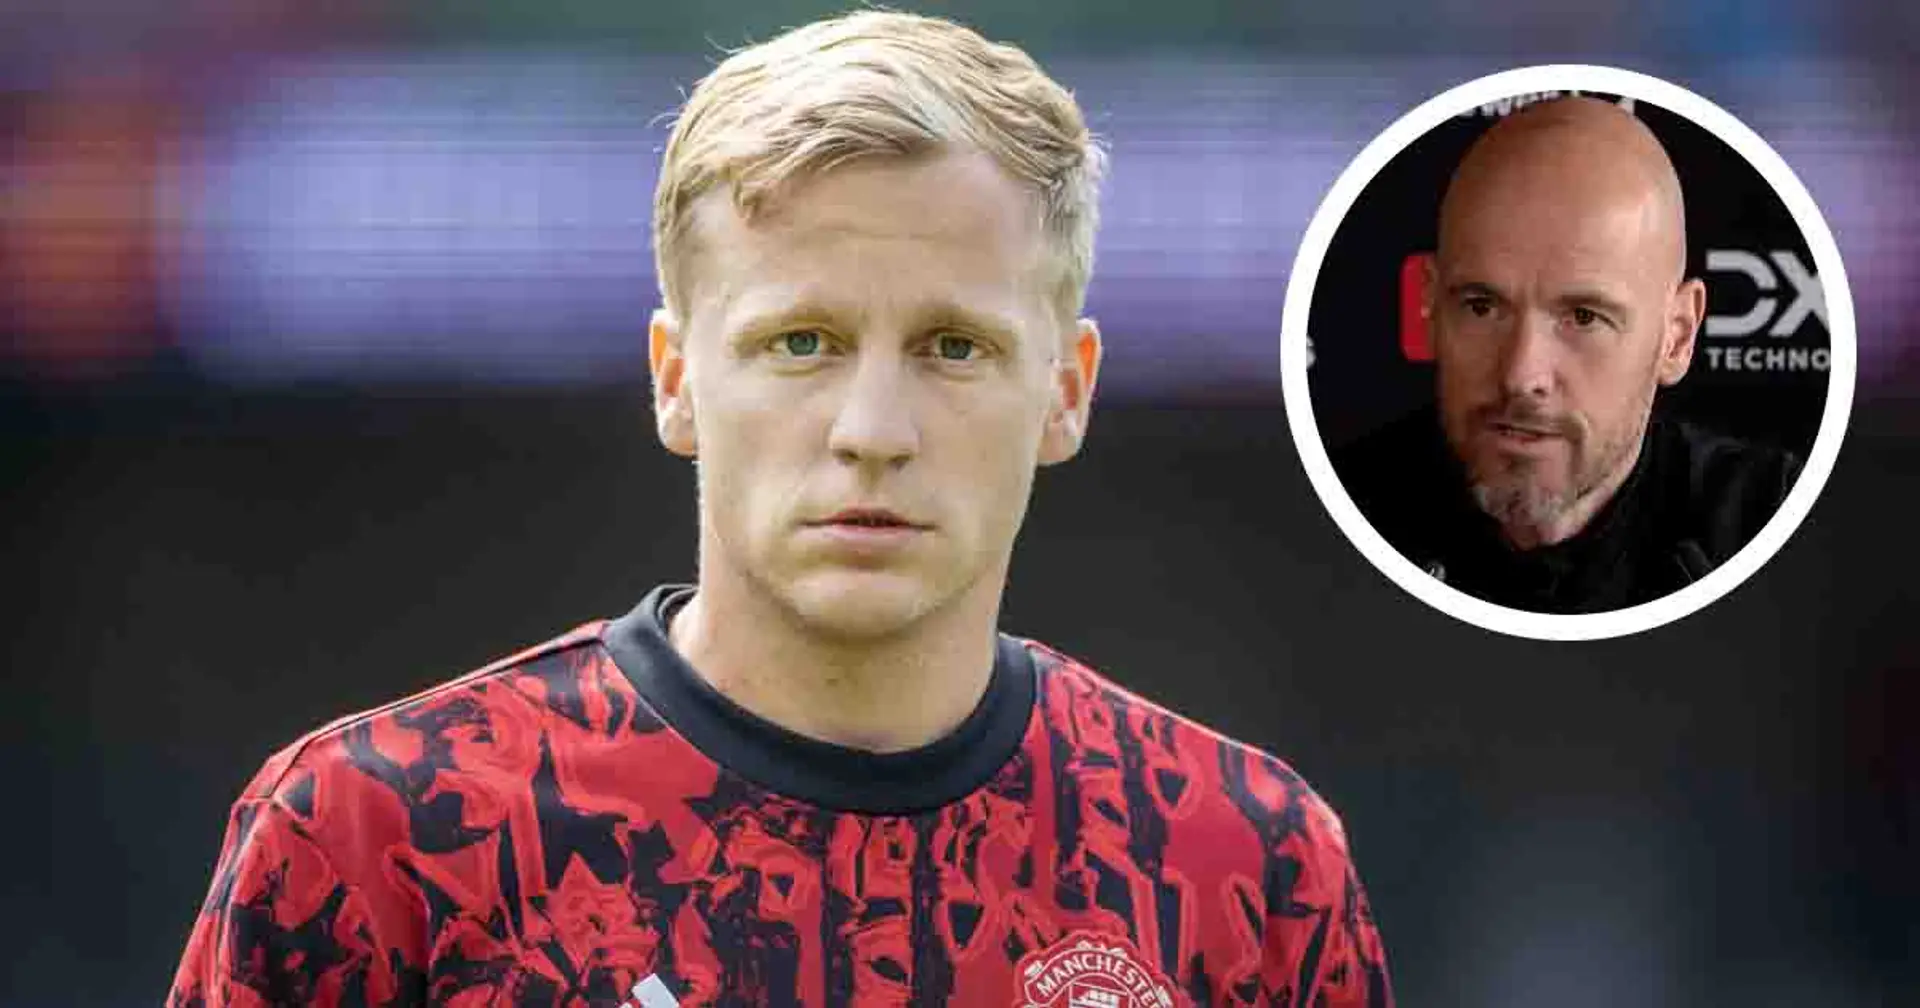 Man United agree Van de Beek loan deal with French club Lorient, his stance revealed (reliability: 4 stars)